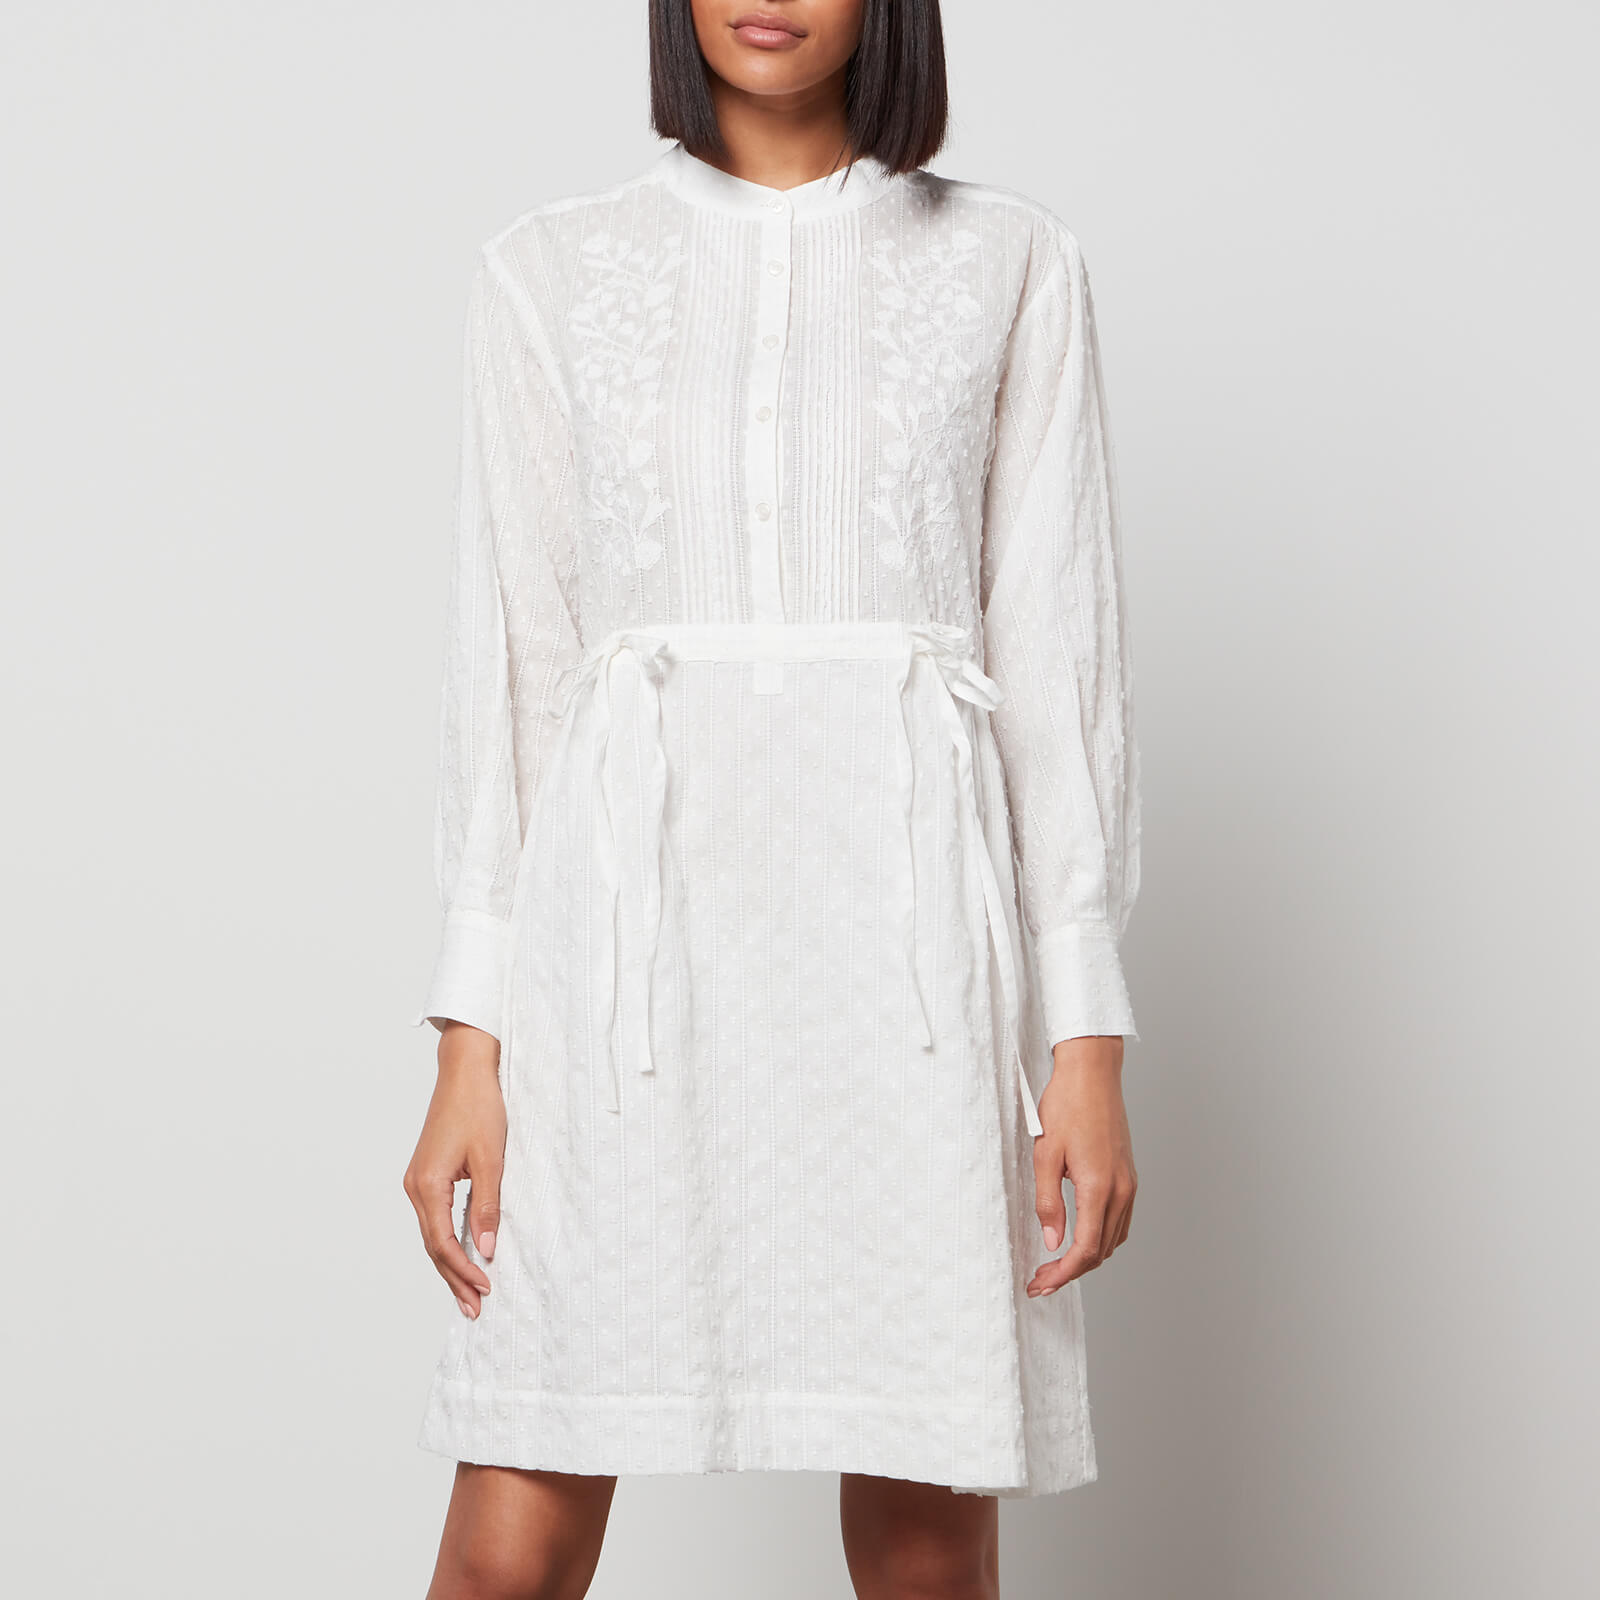 See By Chloe Women's Cotton Voile Jacquard With Embroidery Dress - Crystal White